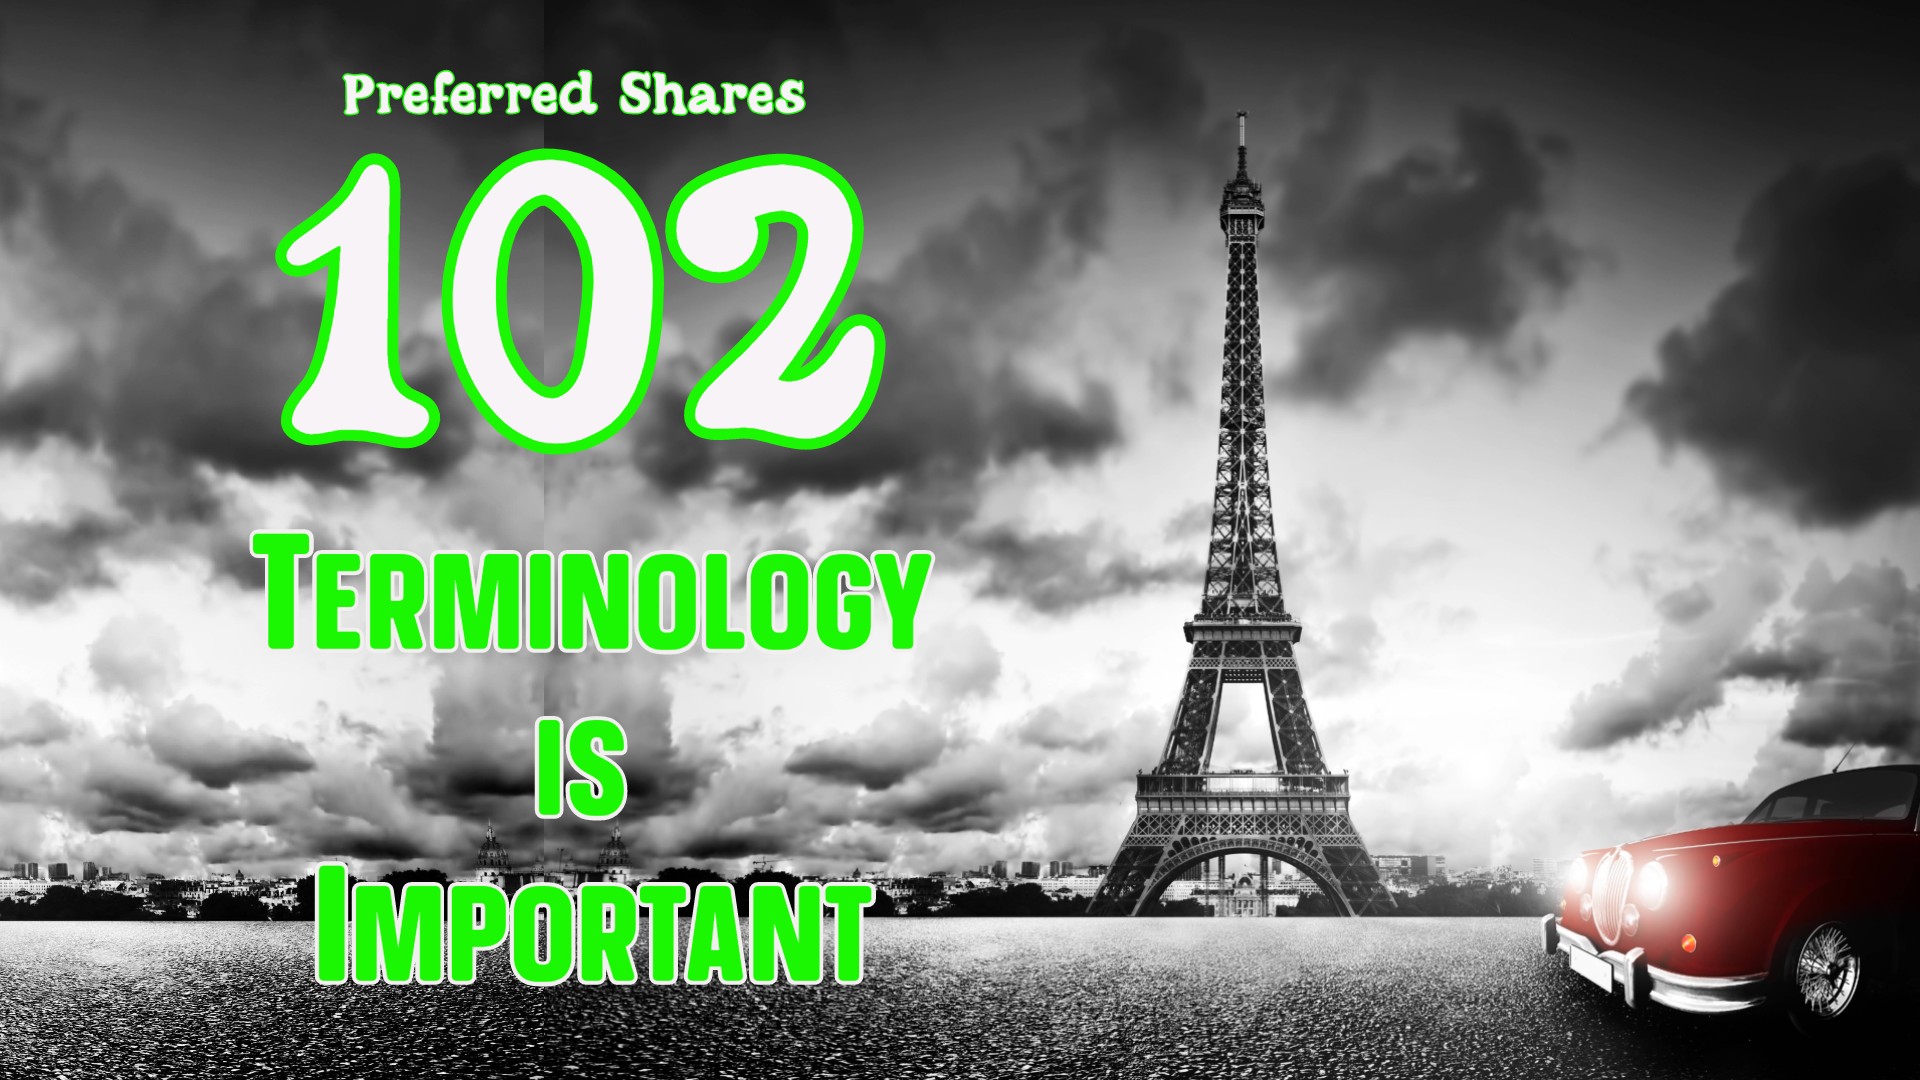 Preferred Shares 102: Terminology is Important